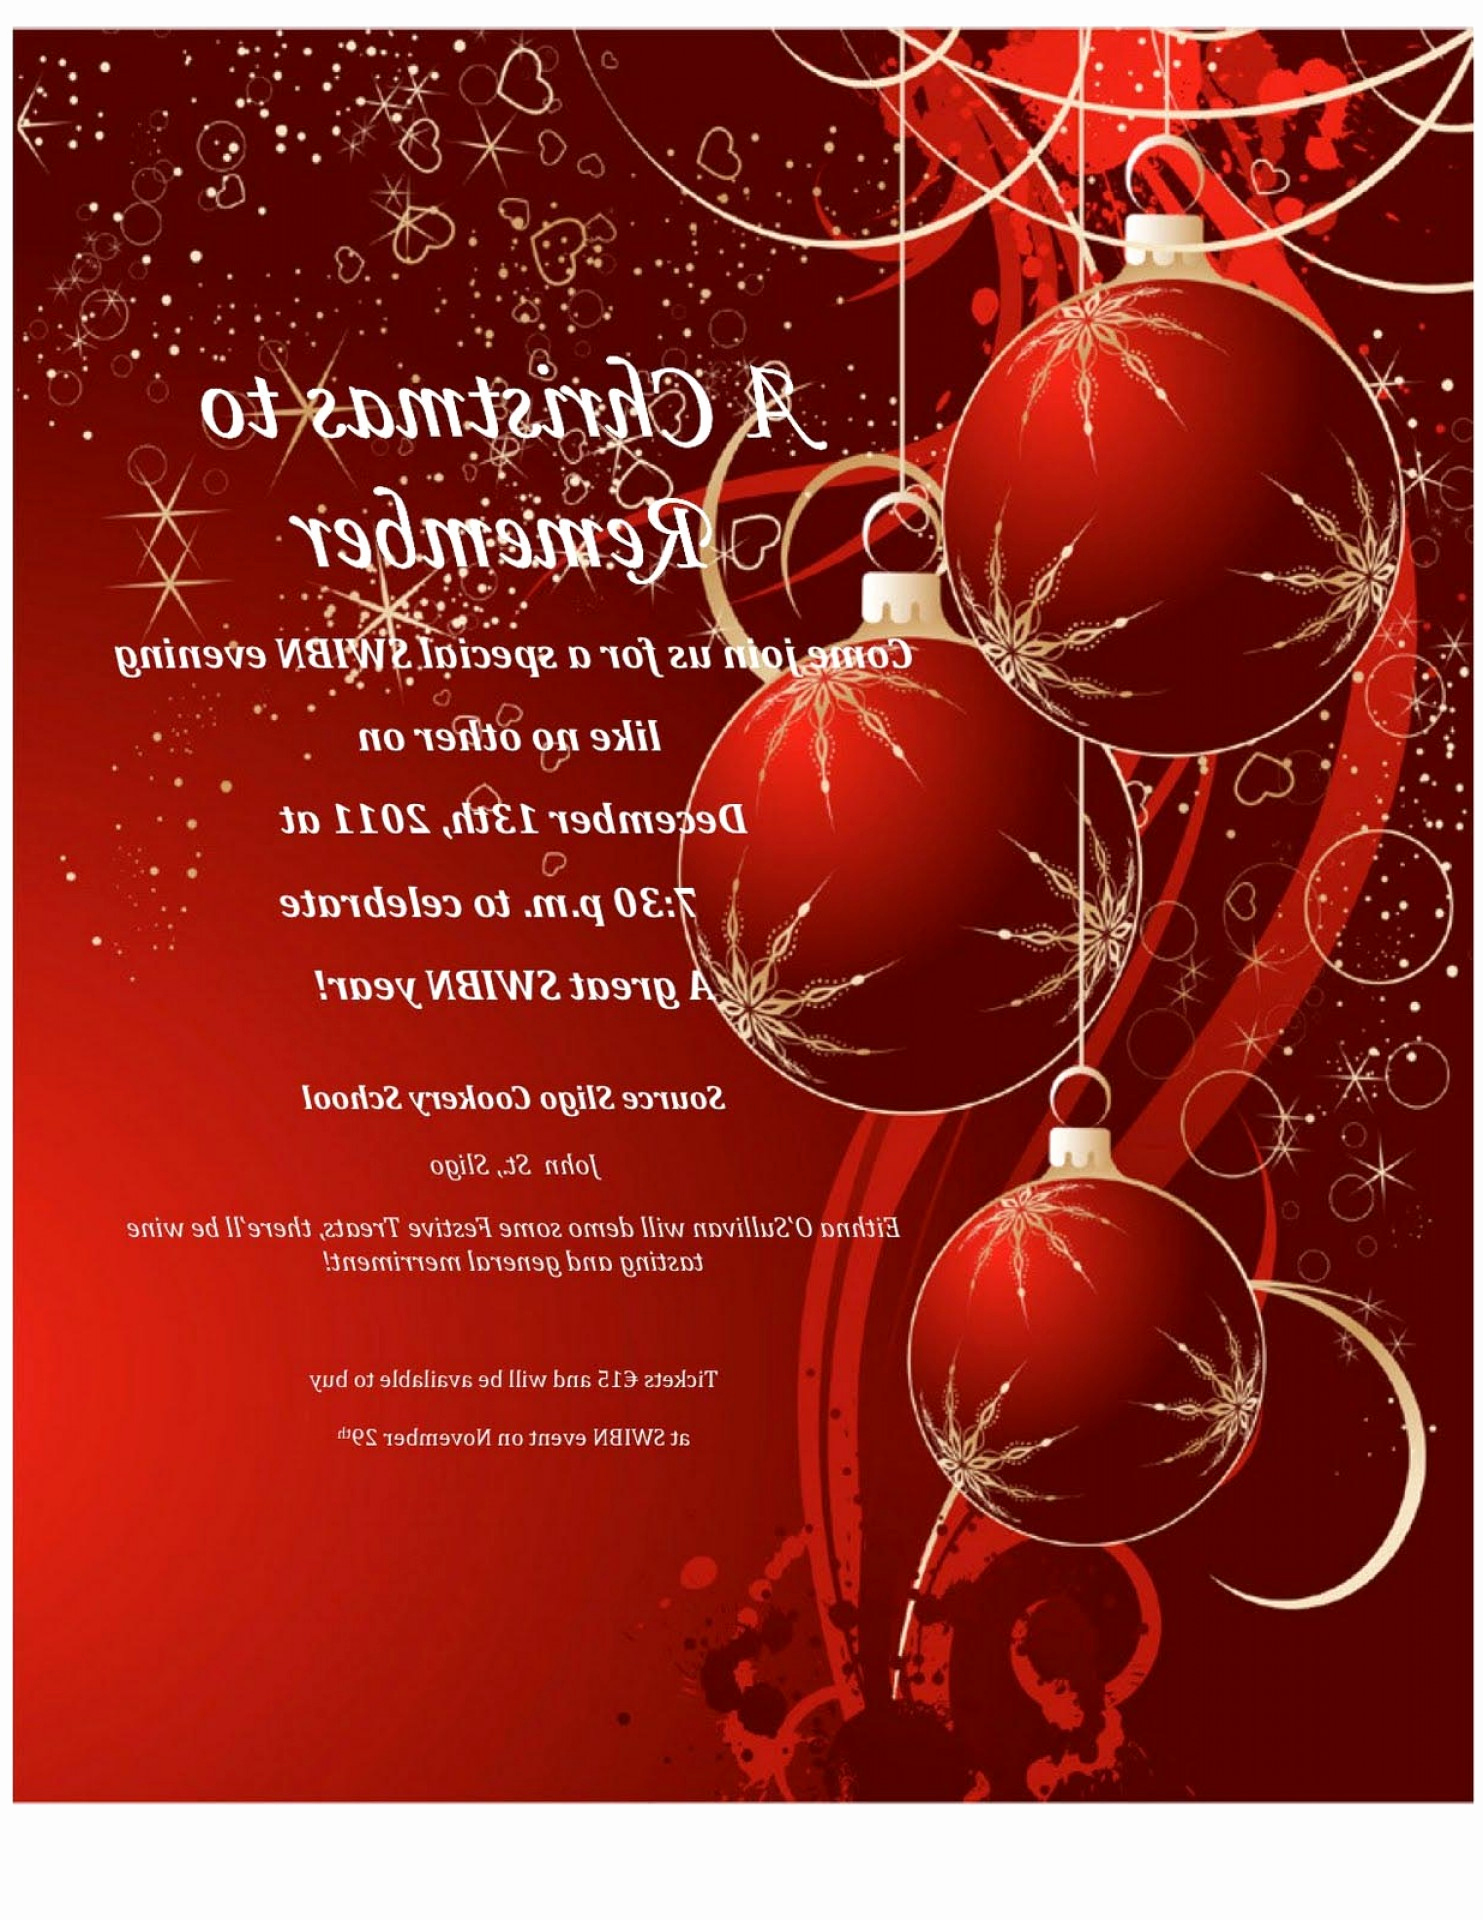 Funny Christmas Party Invitation Wording Unique Jewelry Party Wording Ideas